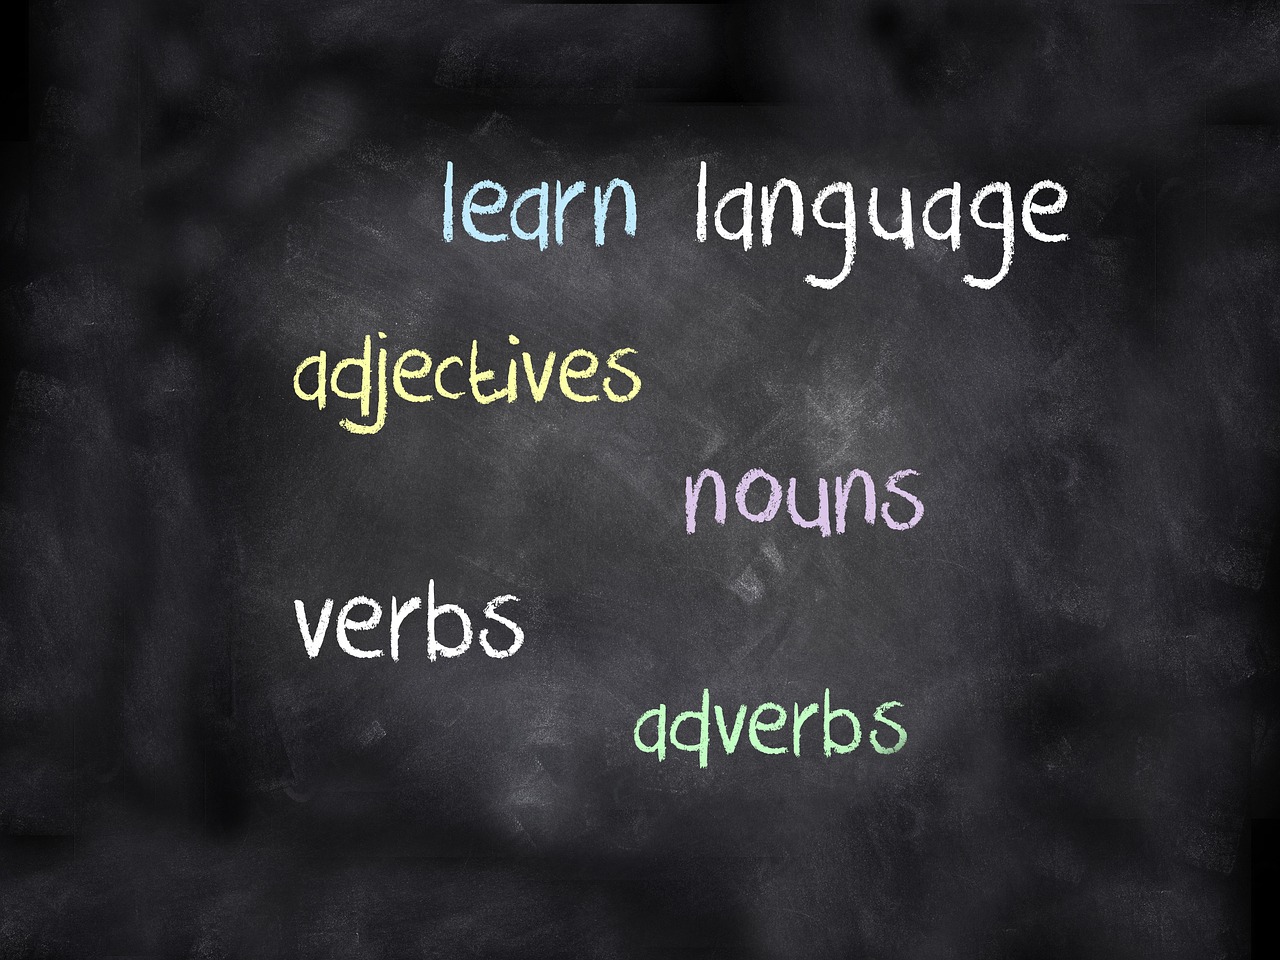 Tips when trying to learn a new language